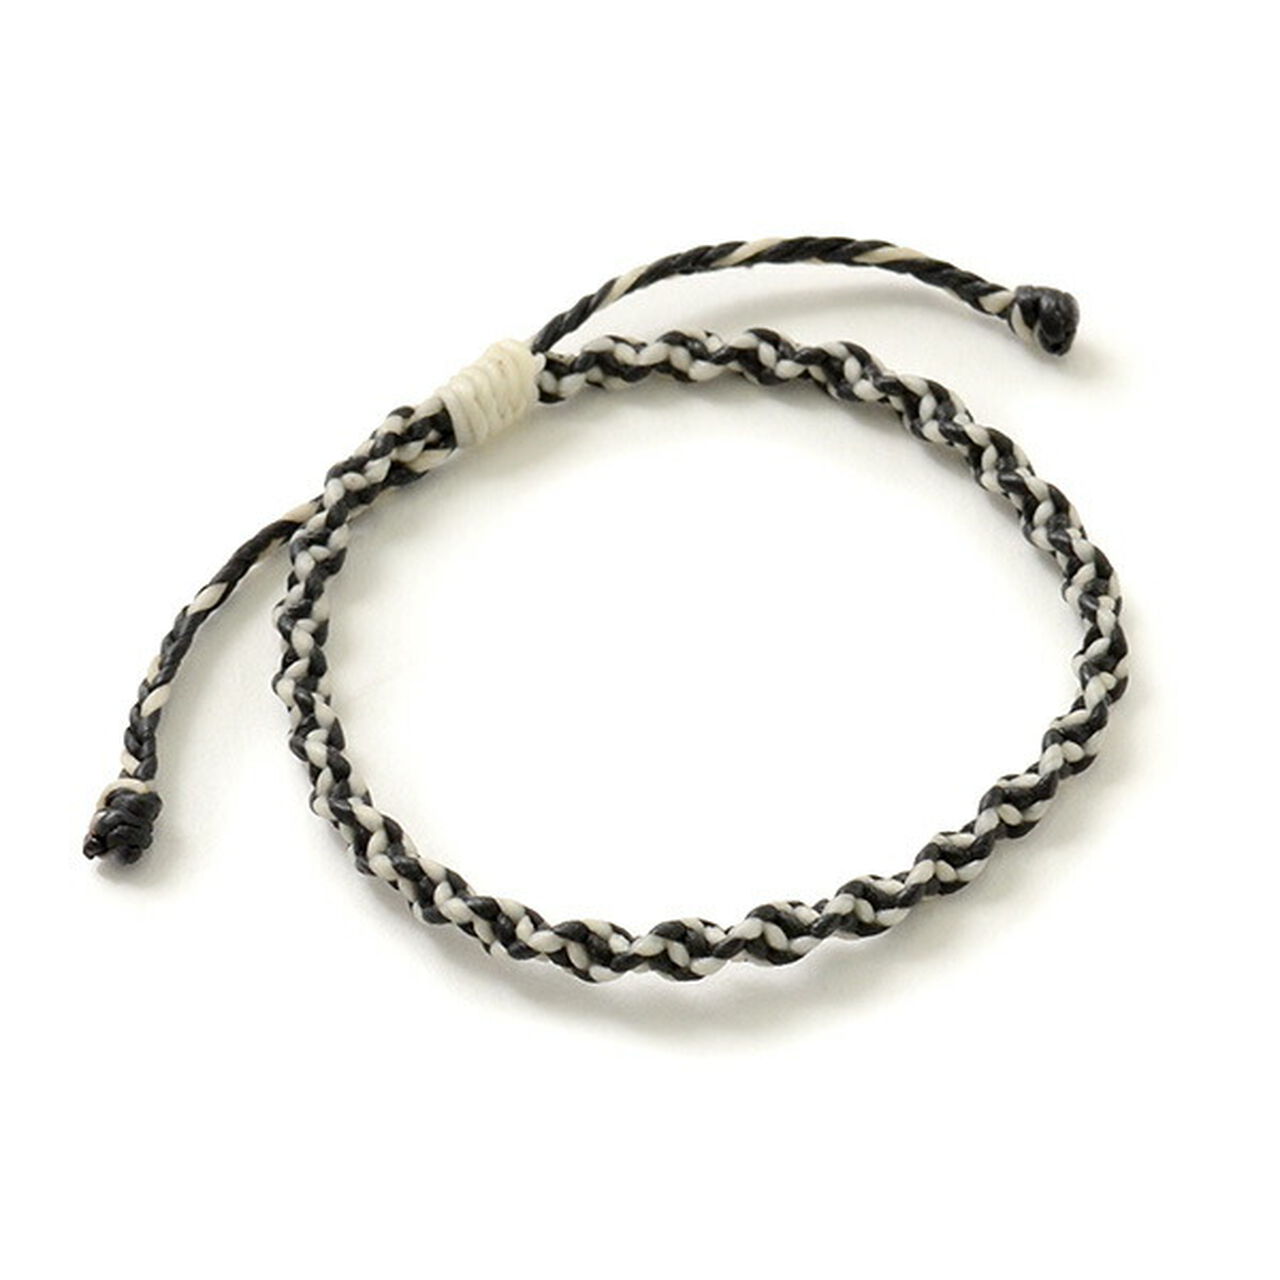 Anklet Wax Cord 2 Tone,Black_White, large image number 0